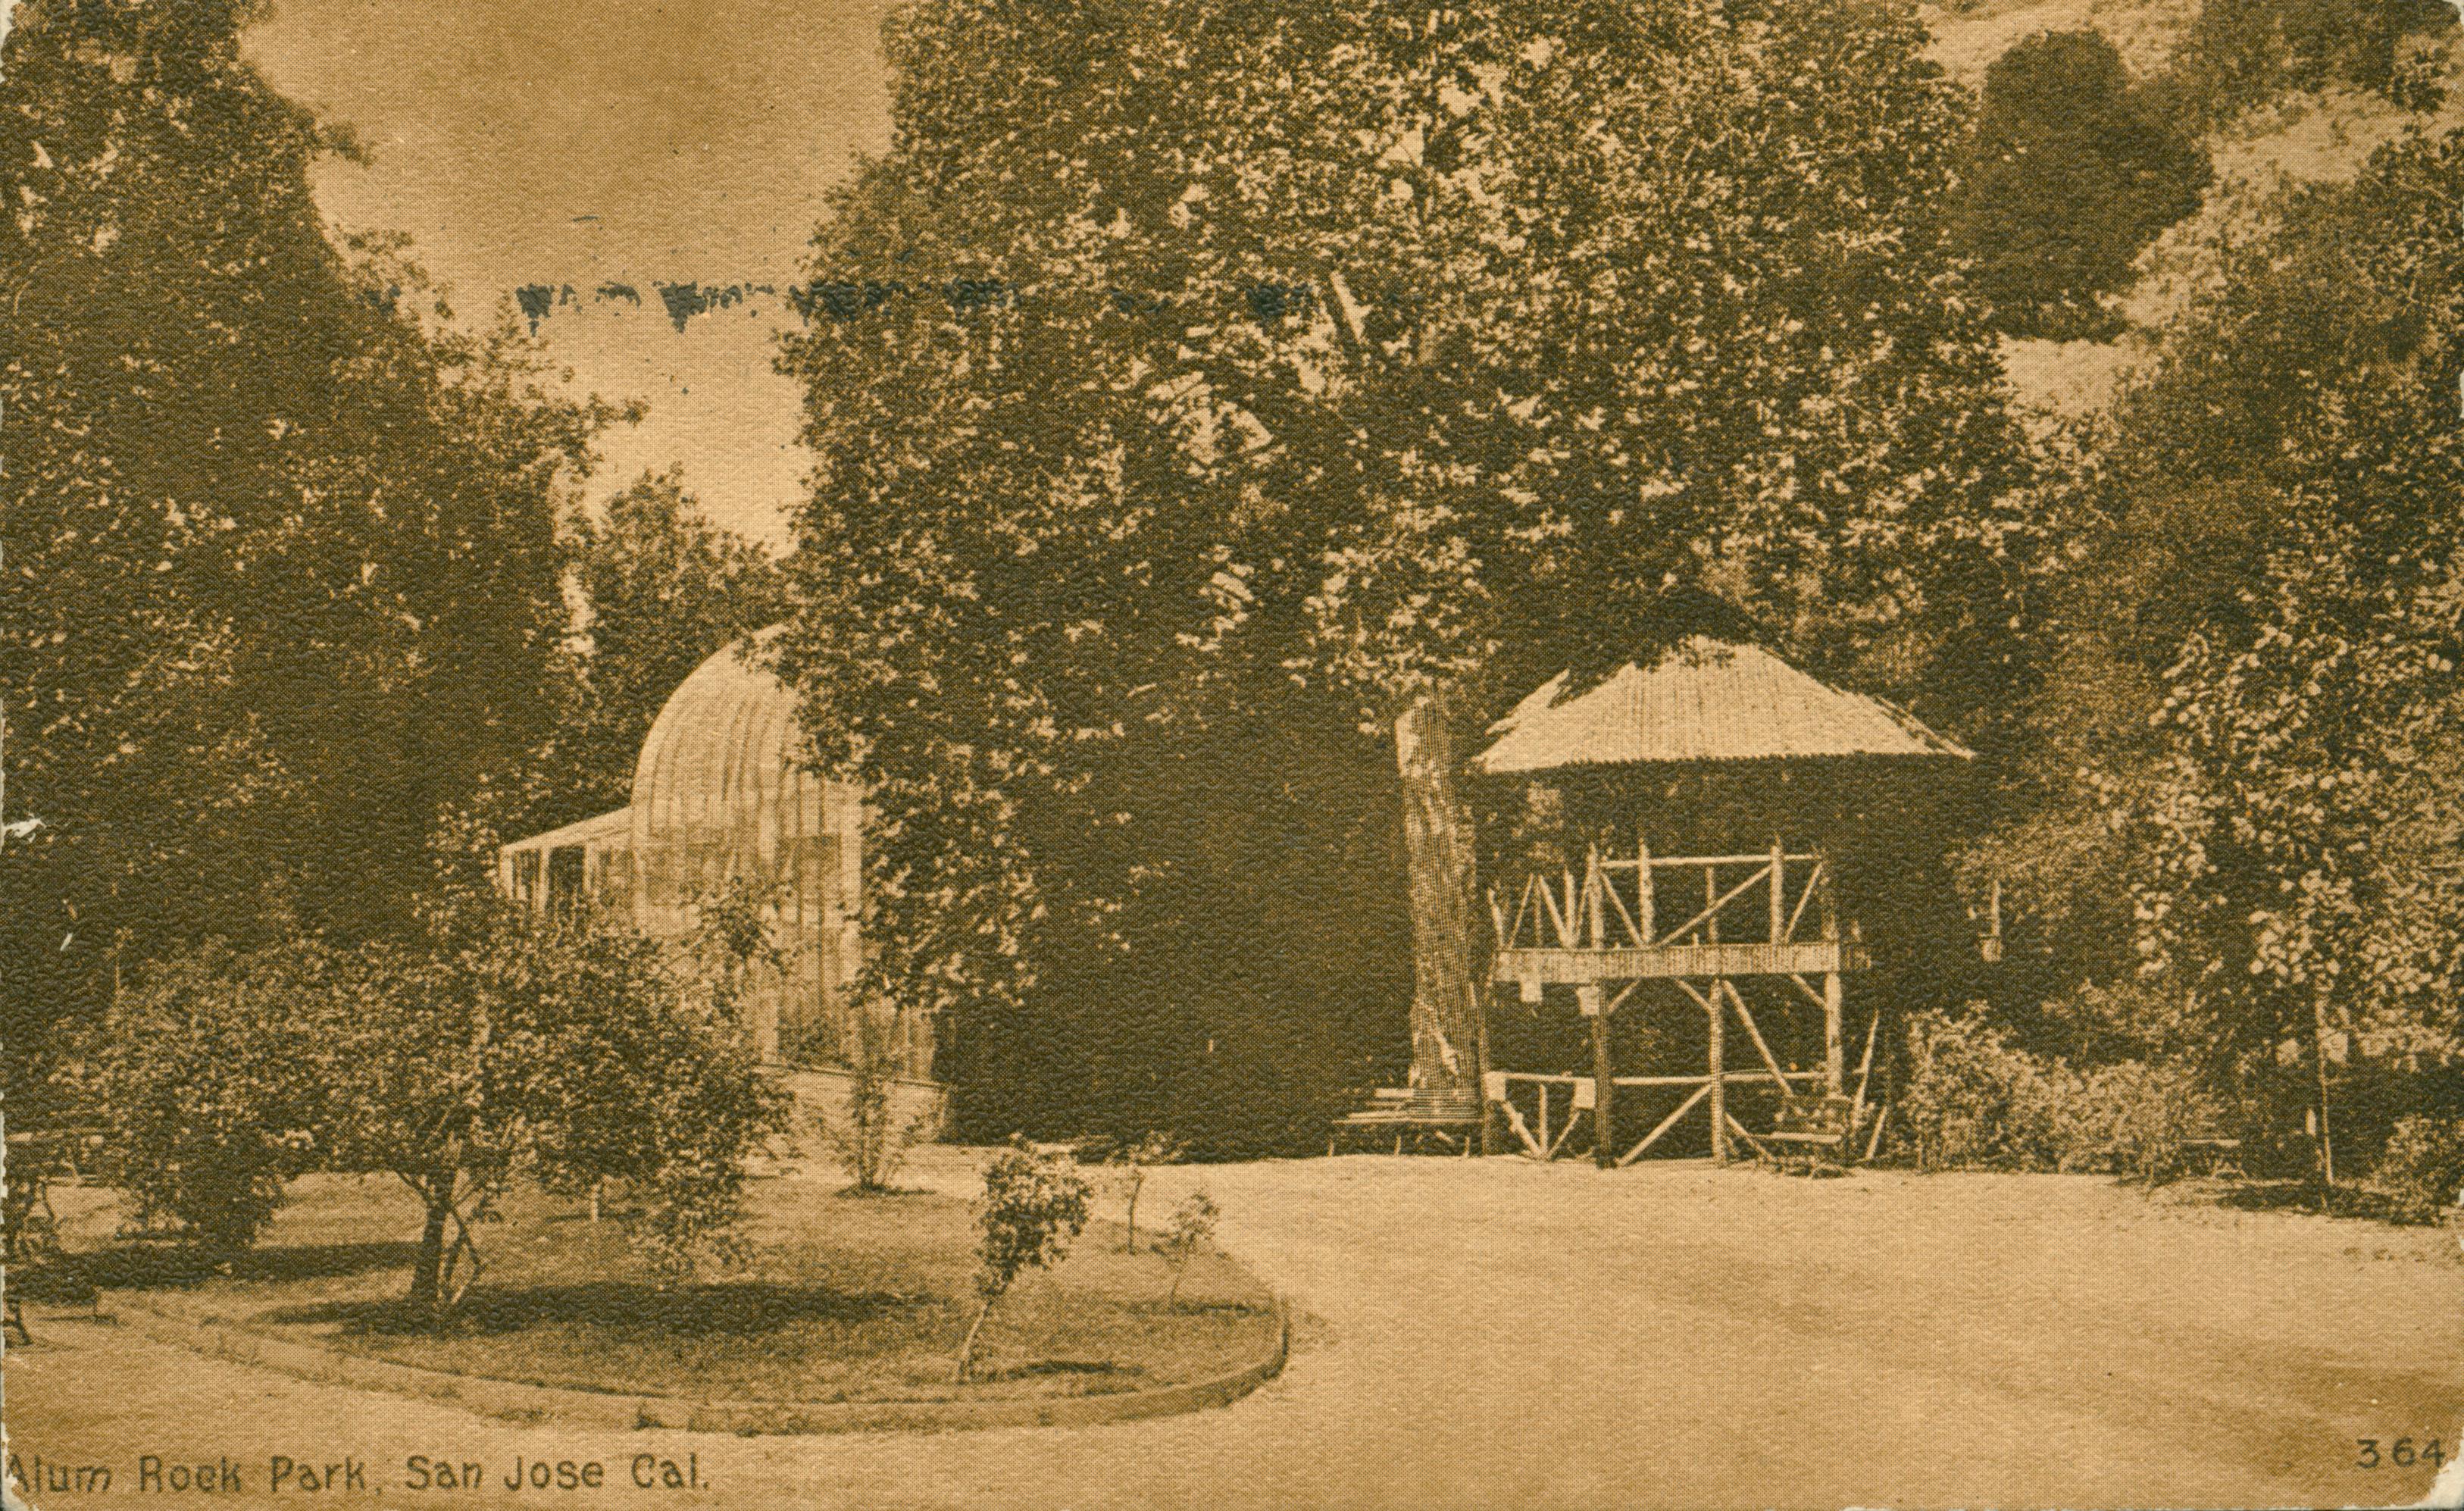 View of Alum Rock Park with trees, gazebo, greenhouse and road